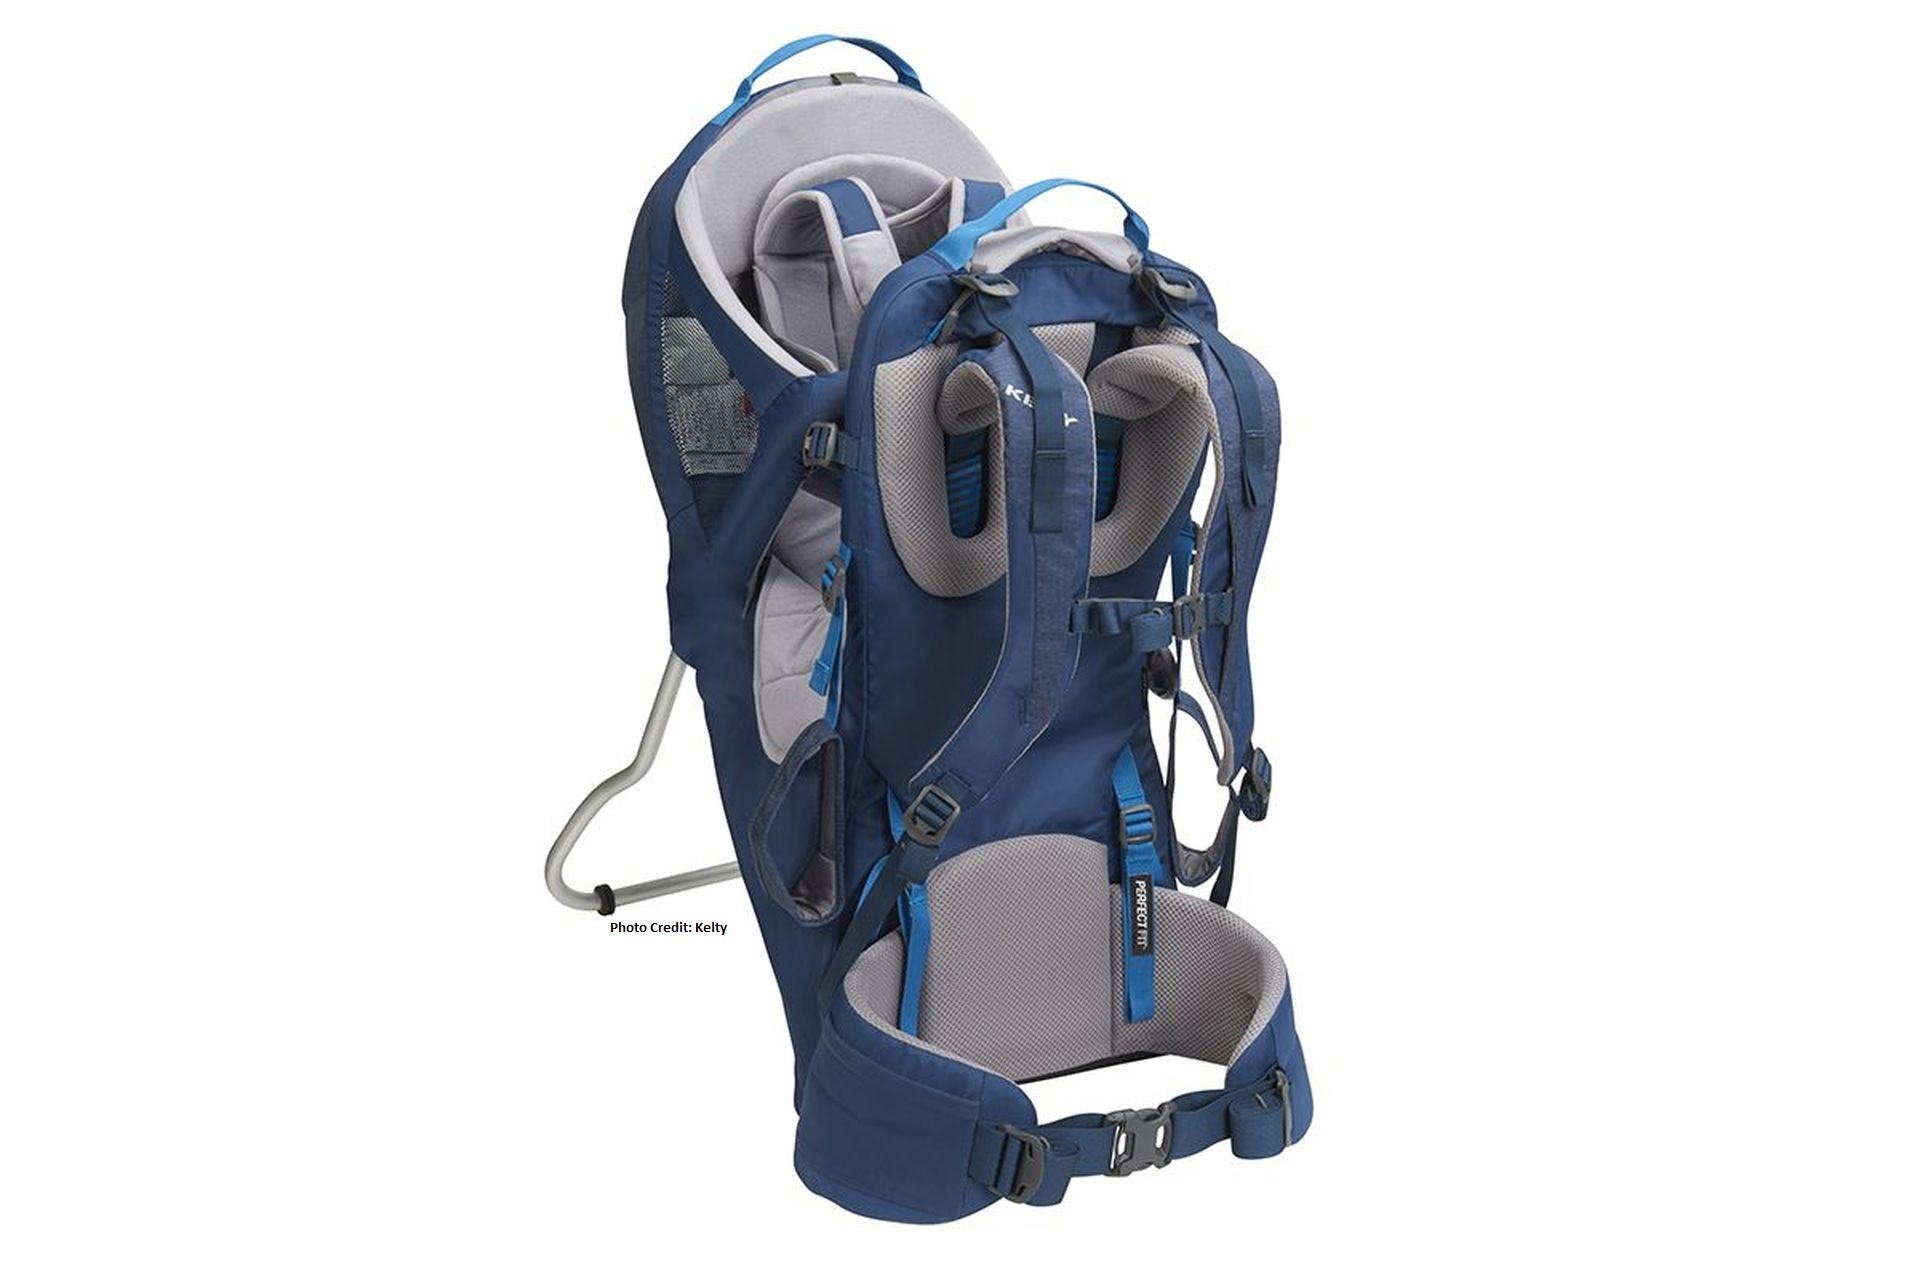 Kelty Journey PerfectFIT Child Carrier view showing straps